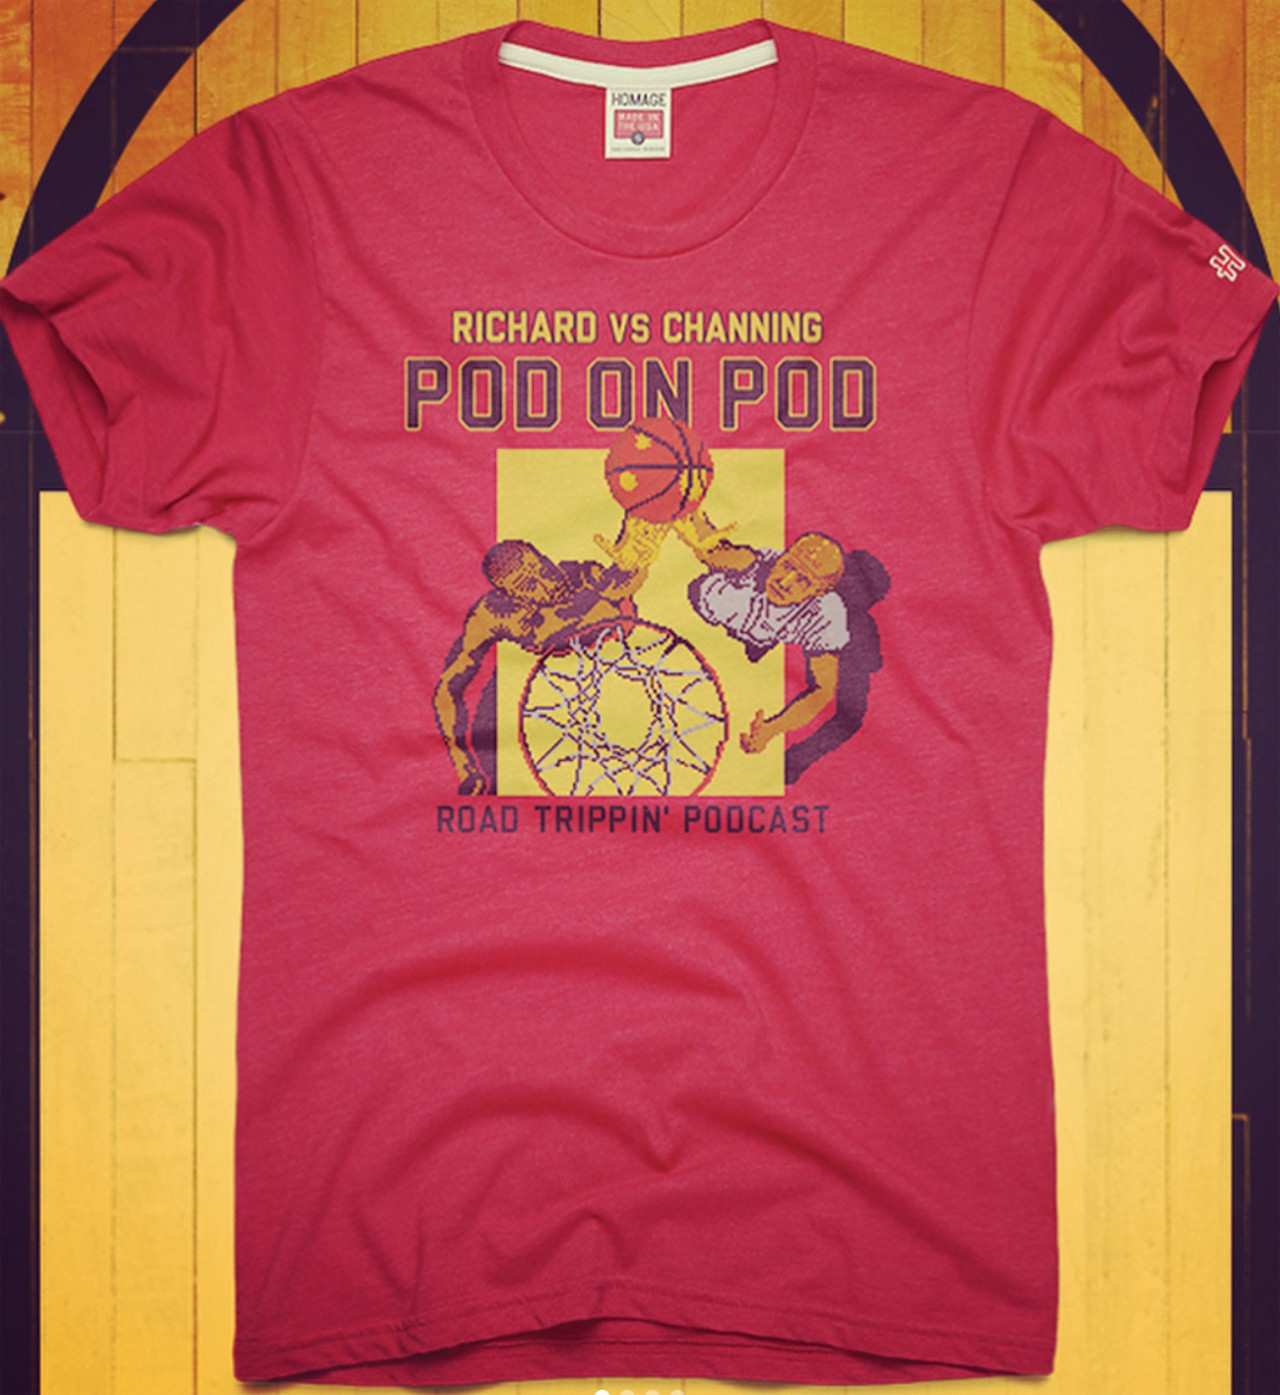 Road Trippin&#146; T-Shirt
Beloved former Cavaliers forward Richard Jefferson was traded at the end of training camp and ended up on the Denver Nuggets, but the podcast that he started with Cavaliers&#146; sweet-shooting big man and close friend Channing Frye lives on. Road Trippin&#146; is continuing in Cleveland with Frye, Fox Sports Ohio&#146;s Cavaliers&#146; sideline reporter Allie Clifton, and the Spanish radio announcer Rafael Hernandez Brito, while Jefferson has started a knockoff pod for his new team. Homage, the Columbus-based apparel company, created a T-shirt &#151; Richard vs. Channing, Pod on Pod &#151; to christen the rivalry. Visit the Homage store at Crocker Park and pick one up today, or grab one online.